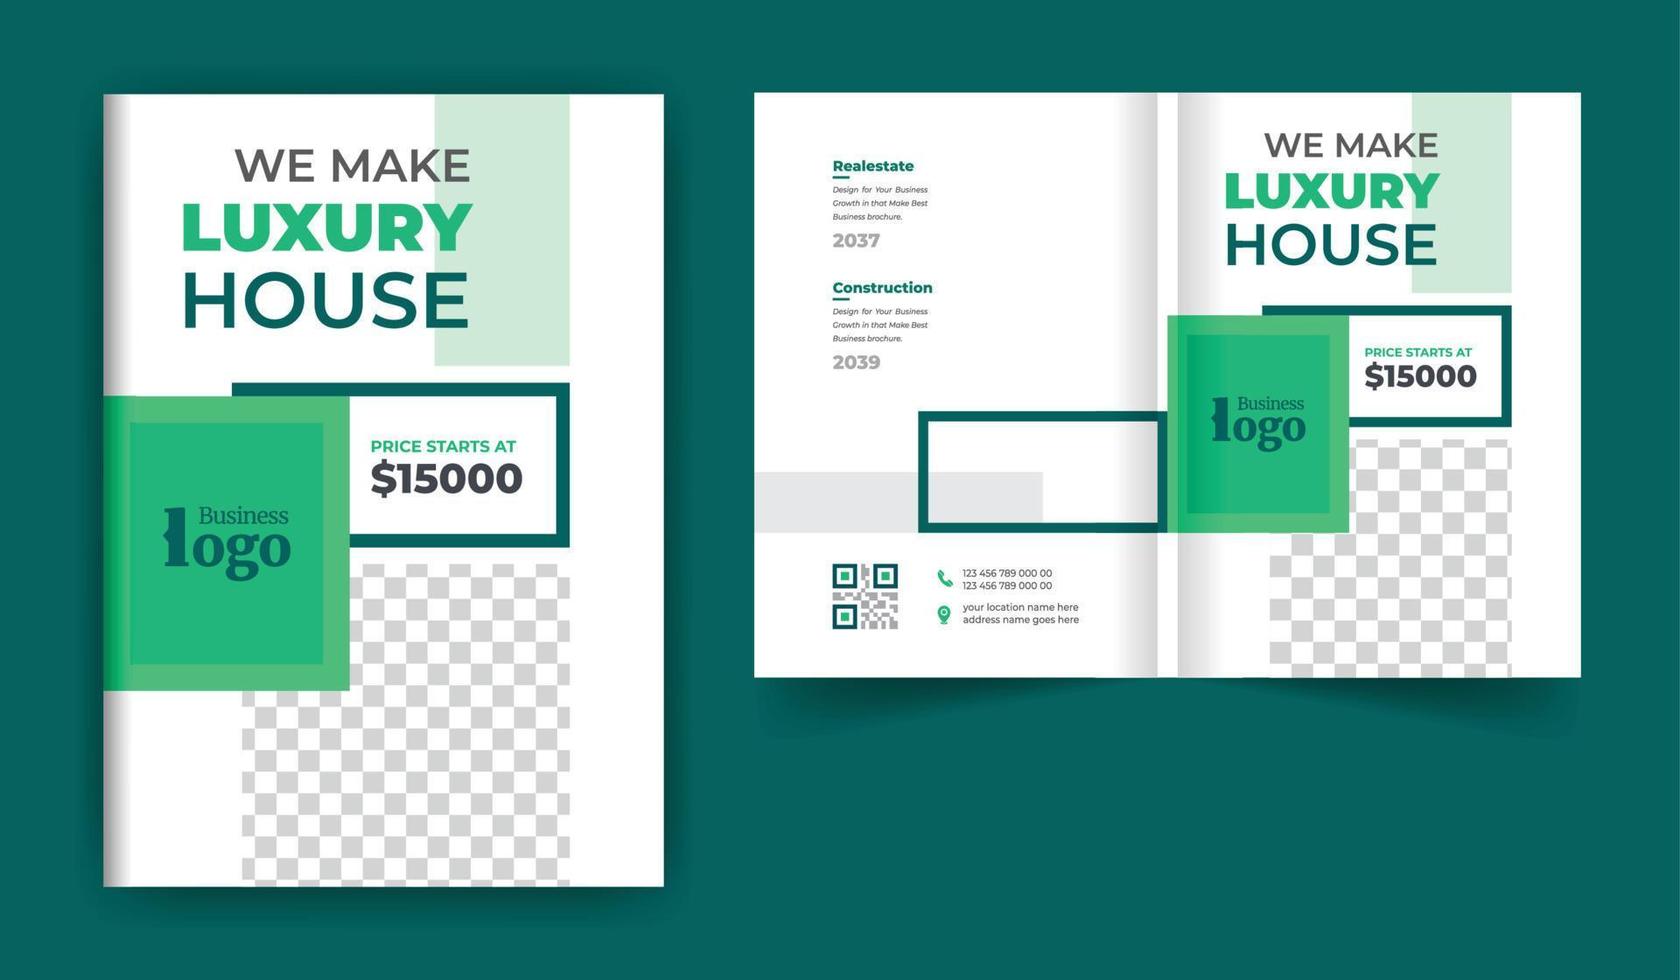 Real estate or construction business brochure cover design theme template. abstract colorful creative and modern bi fold multi-pages layout vector